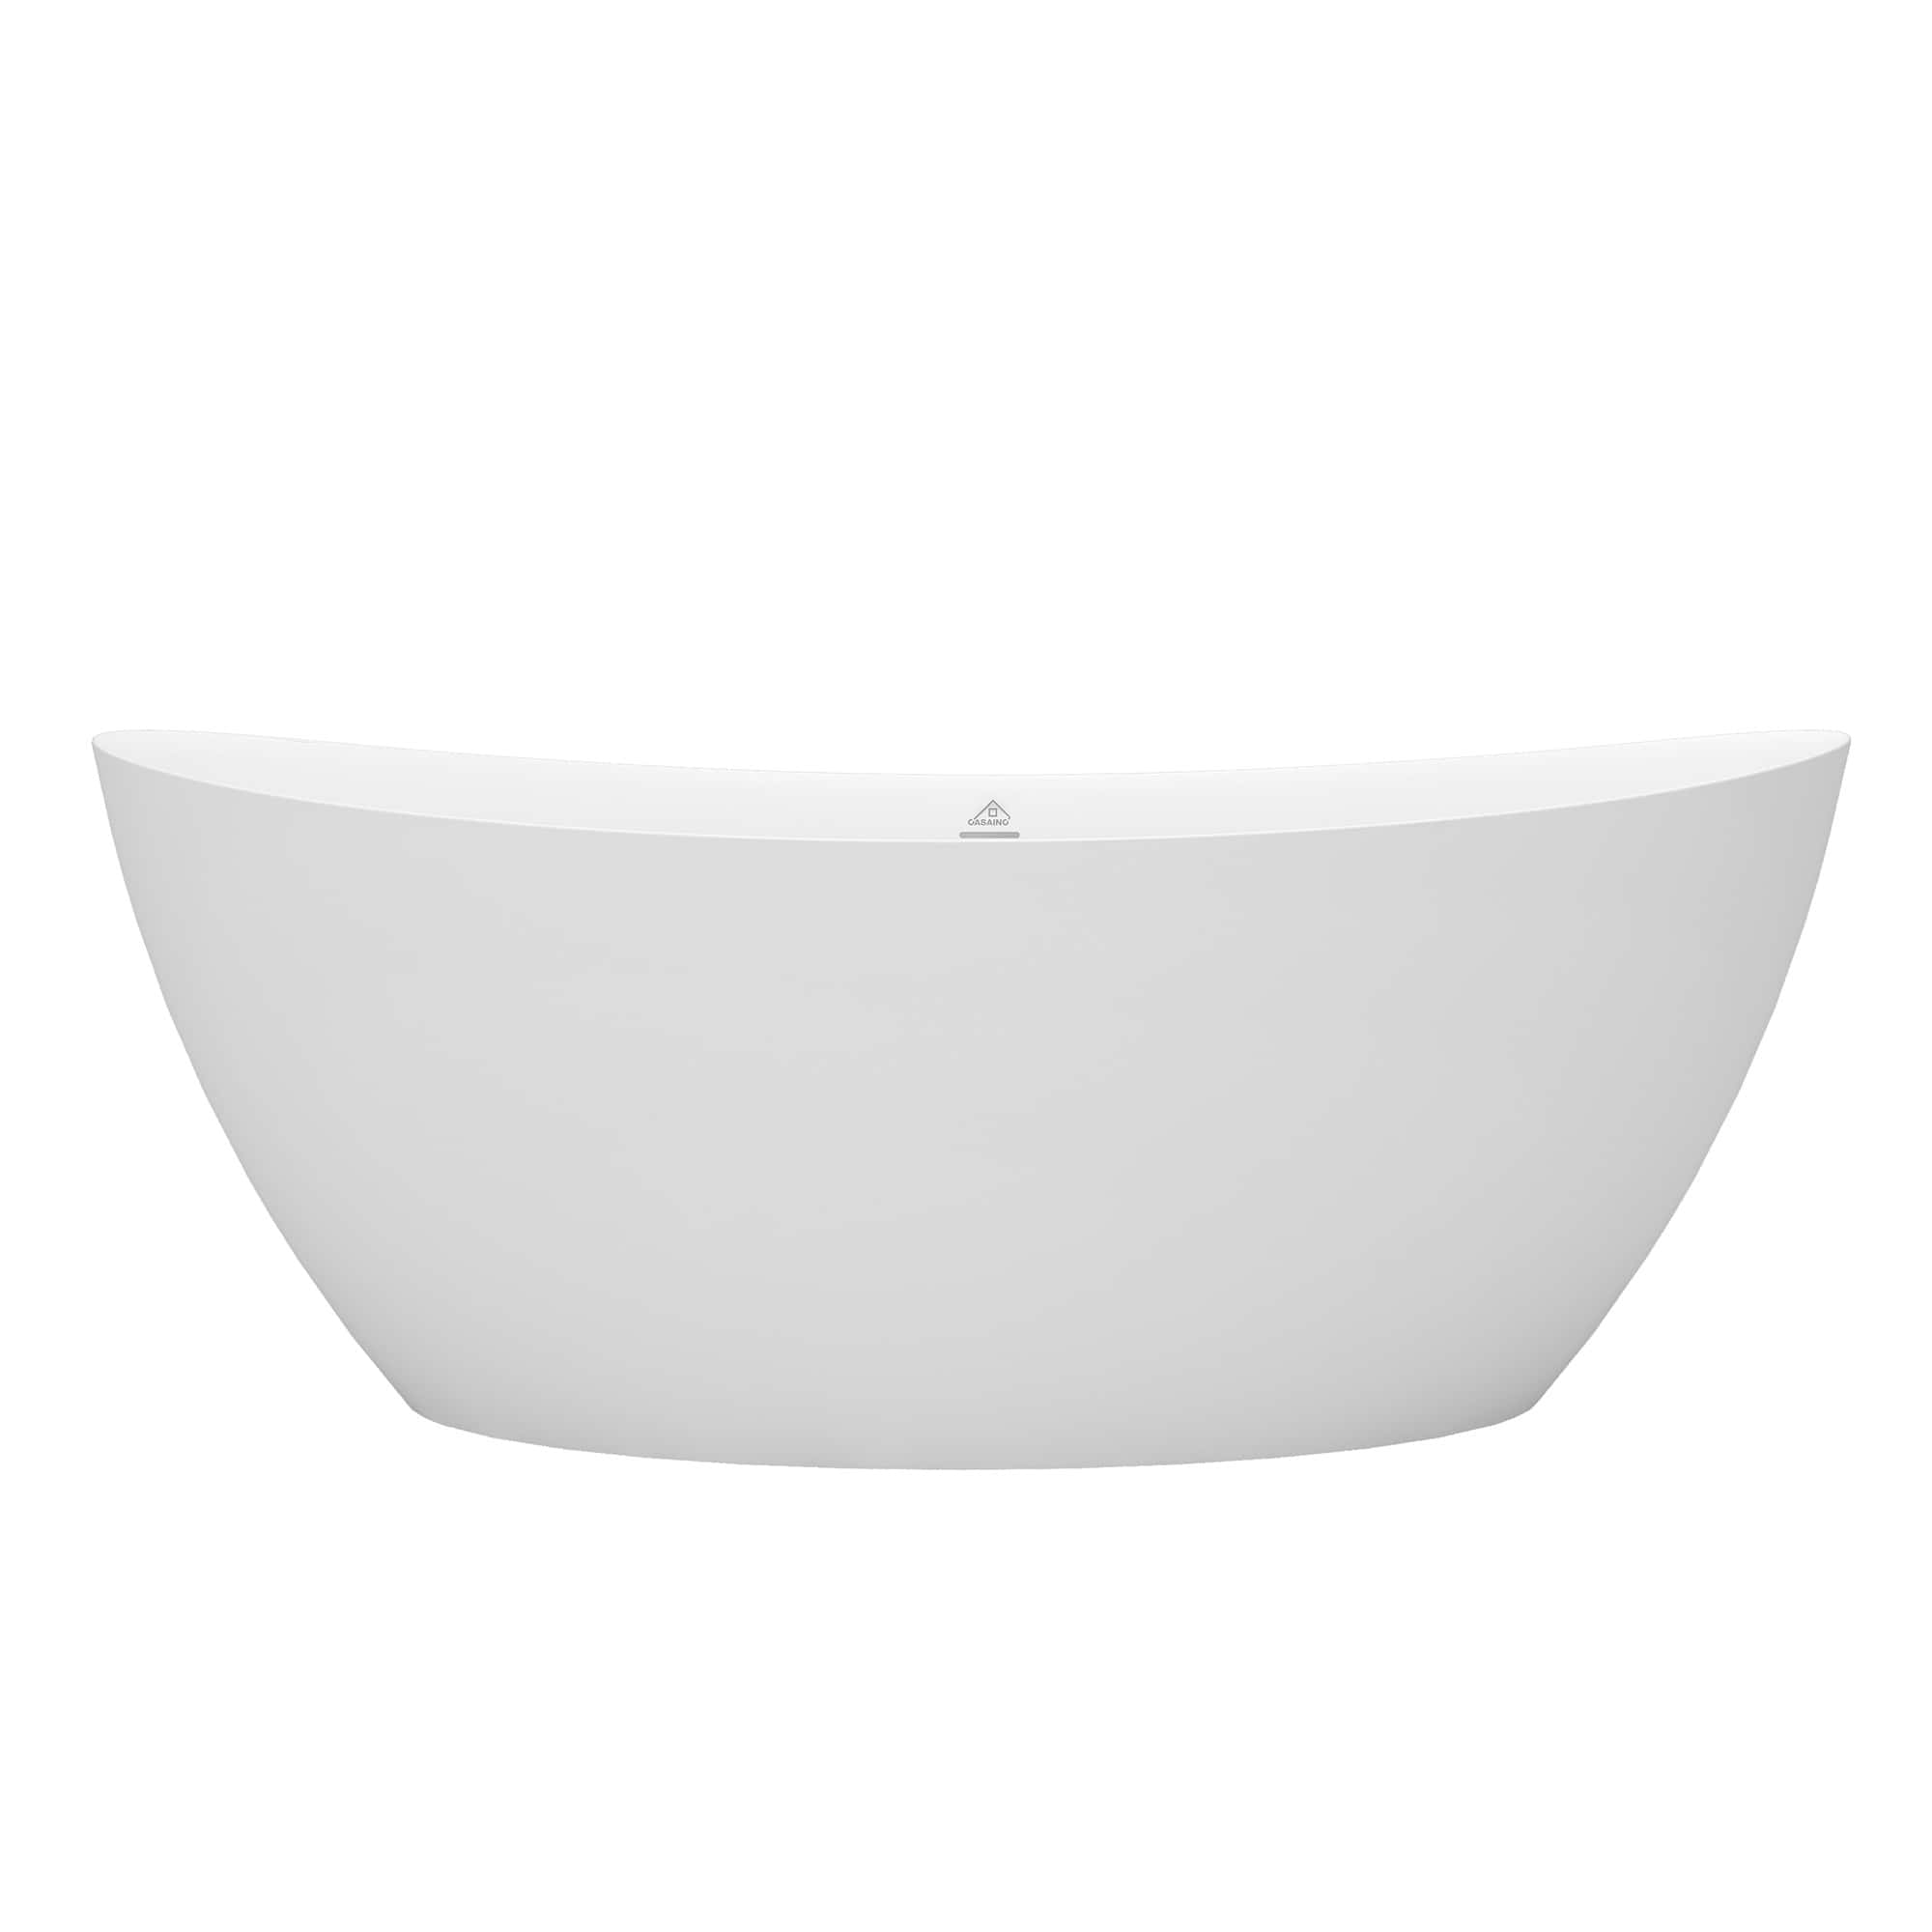 CASAINC 67 Inch Matte White Independent Double-headed Raised Solid Sur